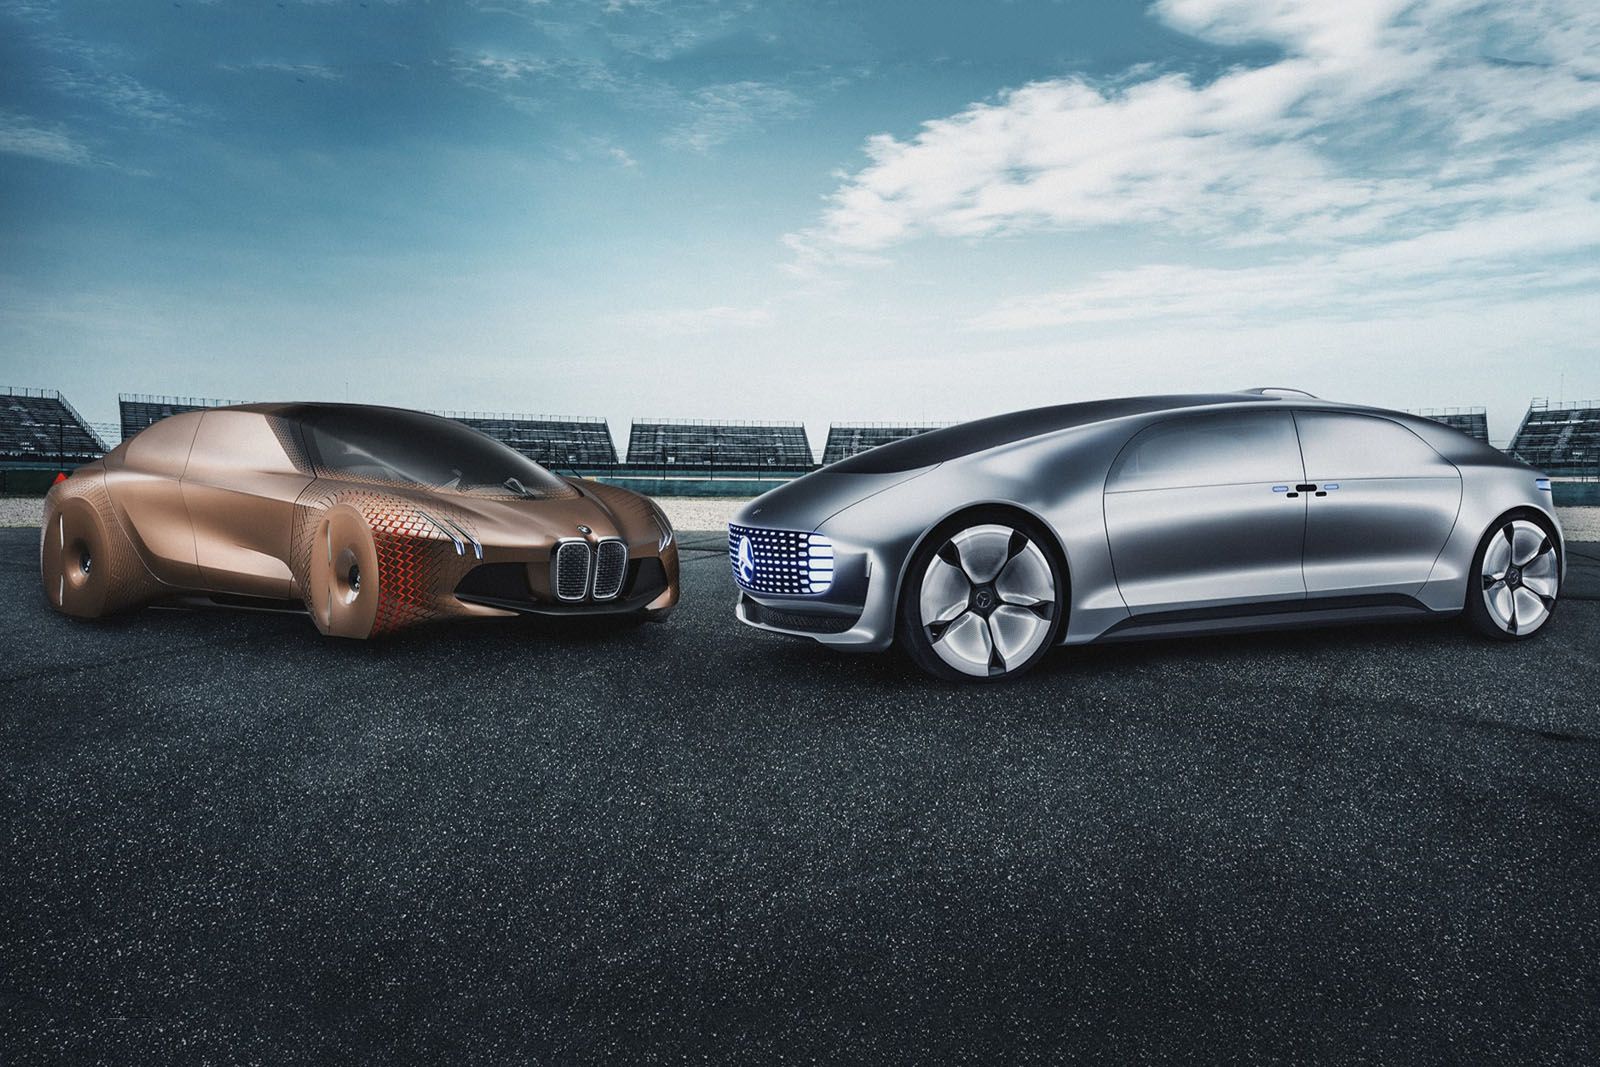 BMW and Daimler are now working together on autonomous driving systems image 1